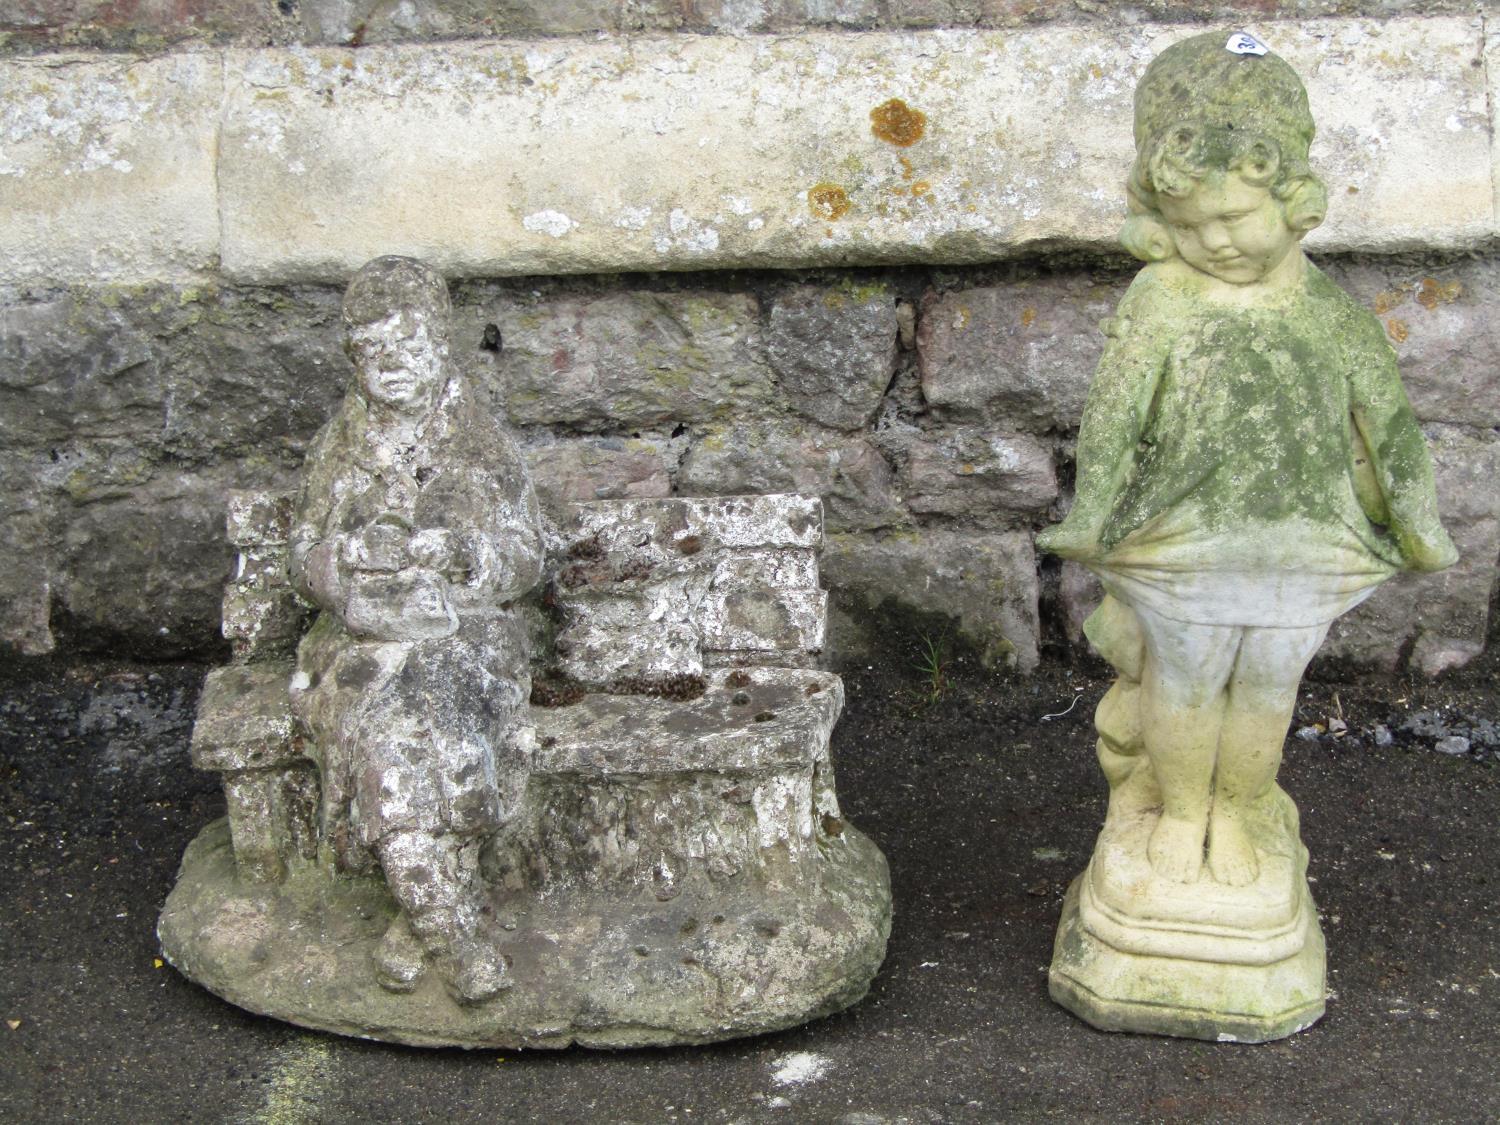 Two weathered reconstituted figures showing a character seated upon a bench and a further example of